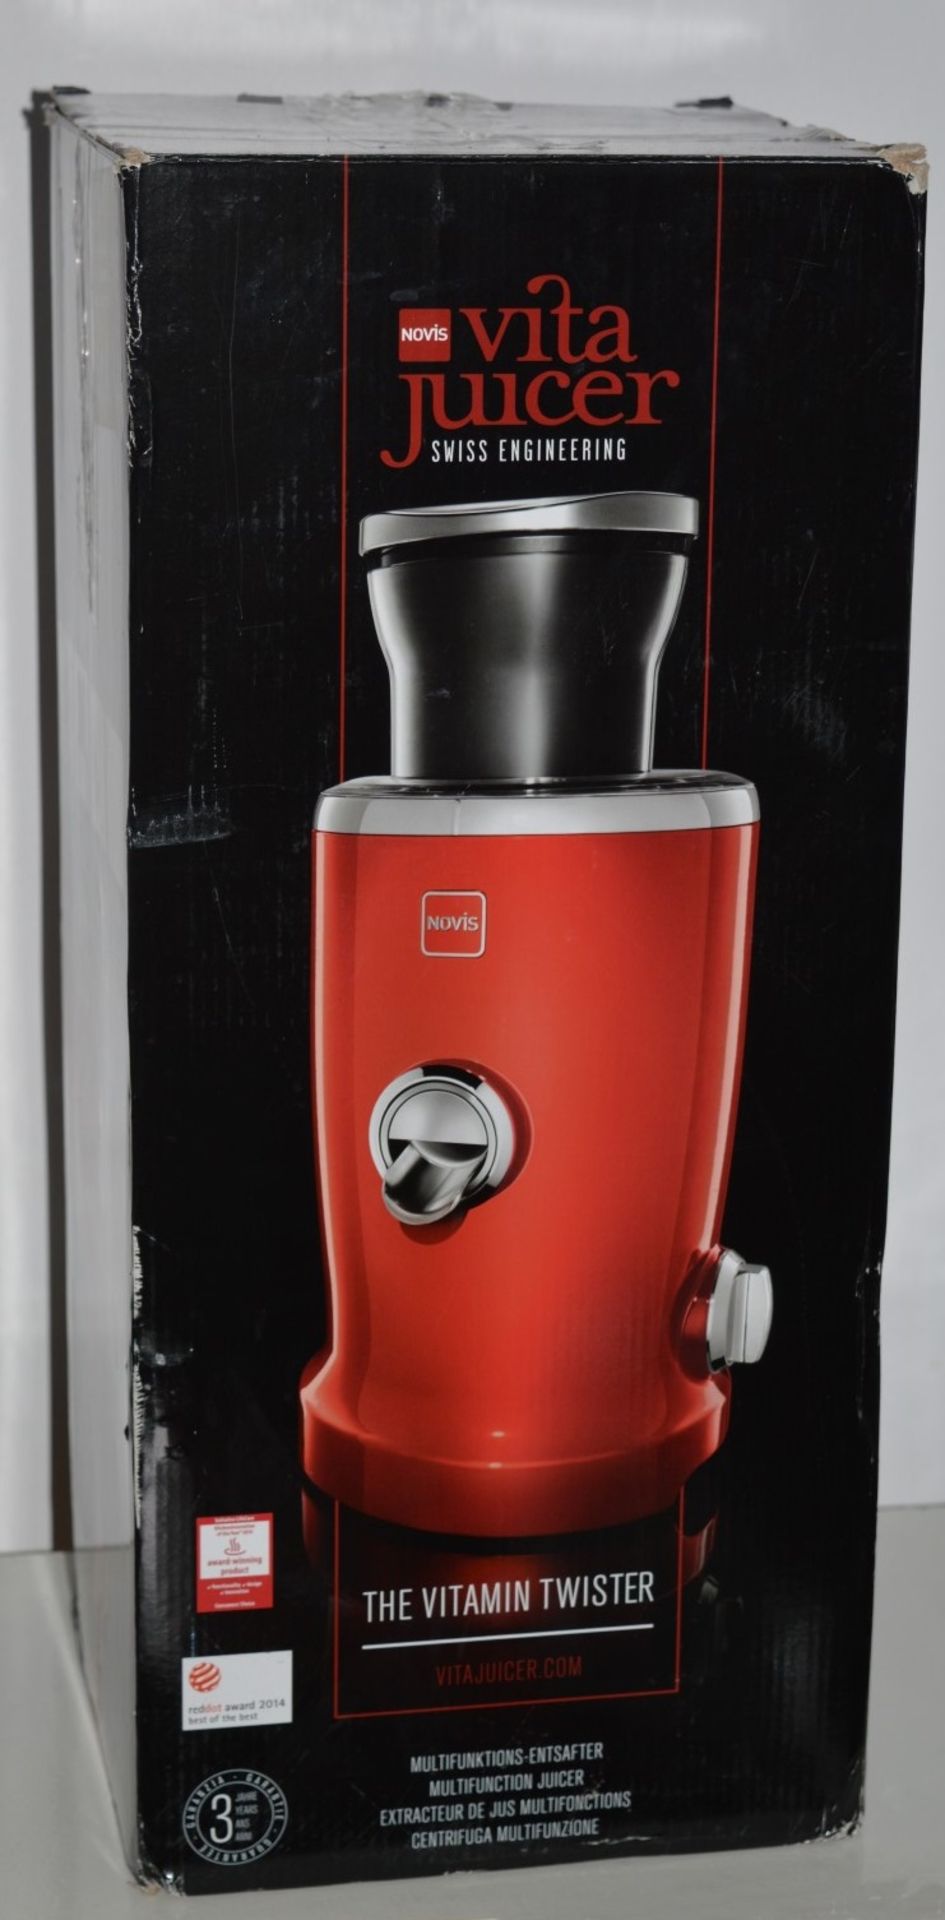 1 x Novis Vita Juice Blender in Red - Made in Switzerkabd For a Natural Healthy Life Style - With - Image 5 of 8